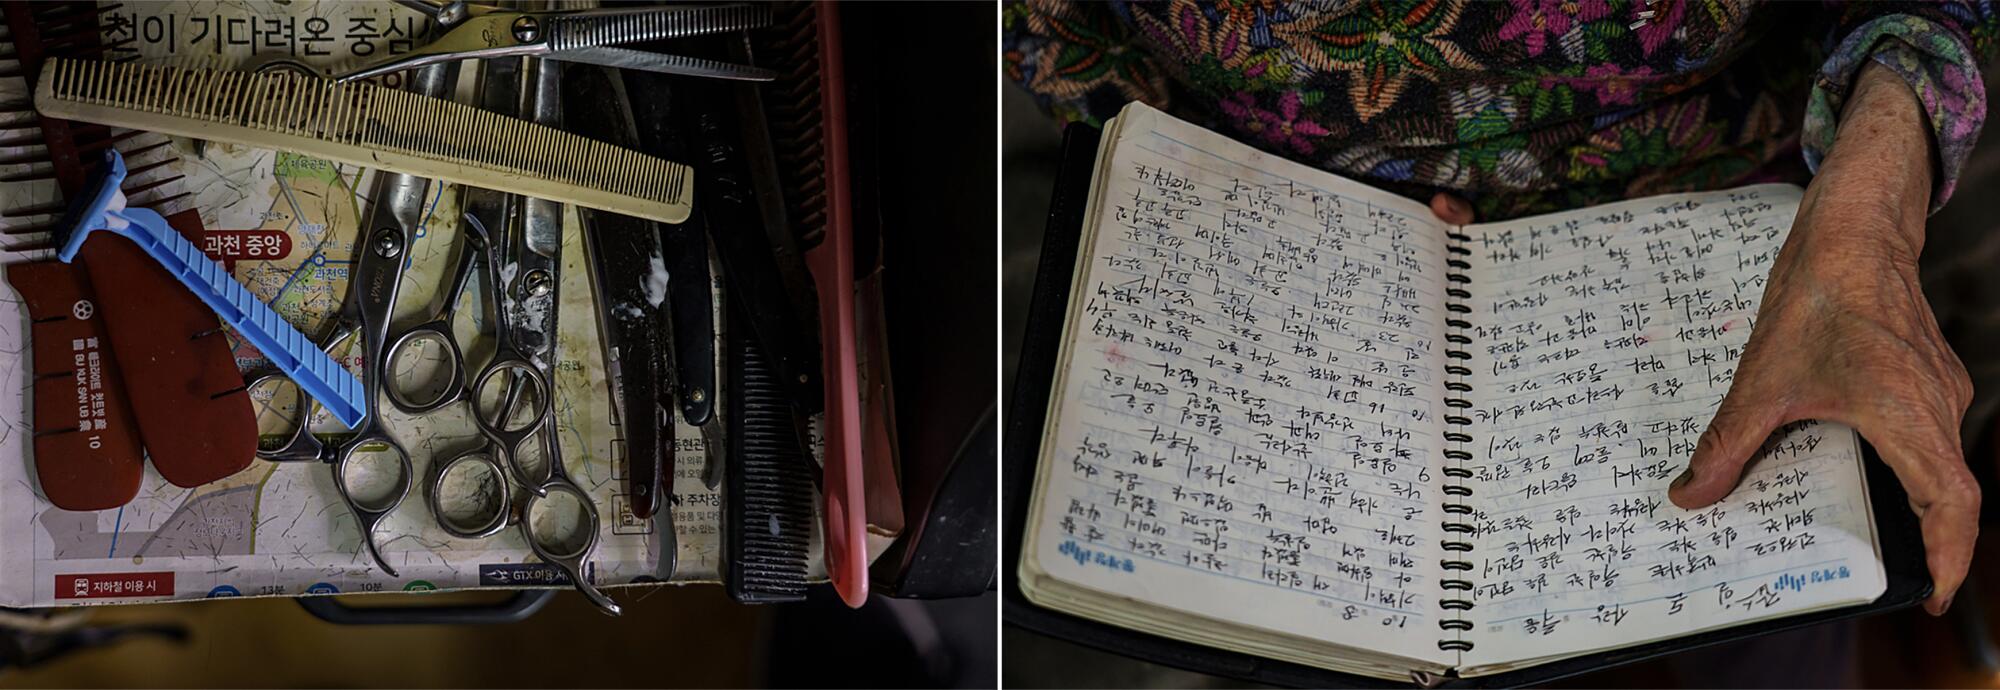 Barber Lee Duk-hoon's tools of the trade and her diary